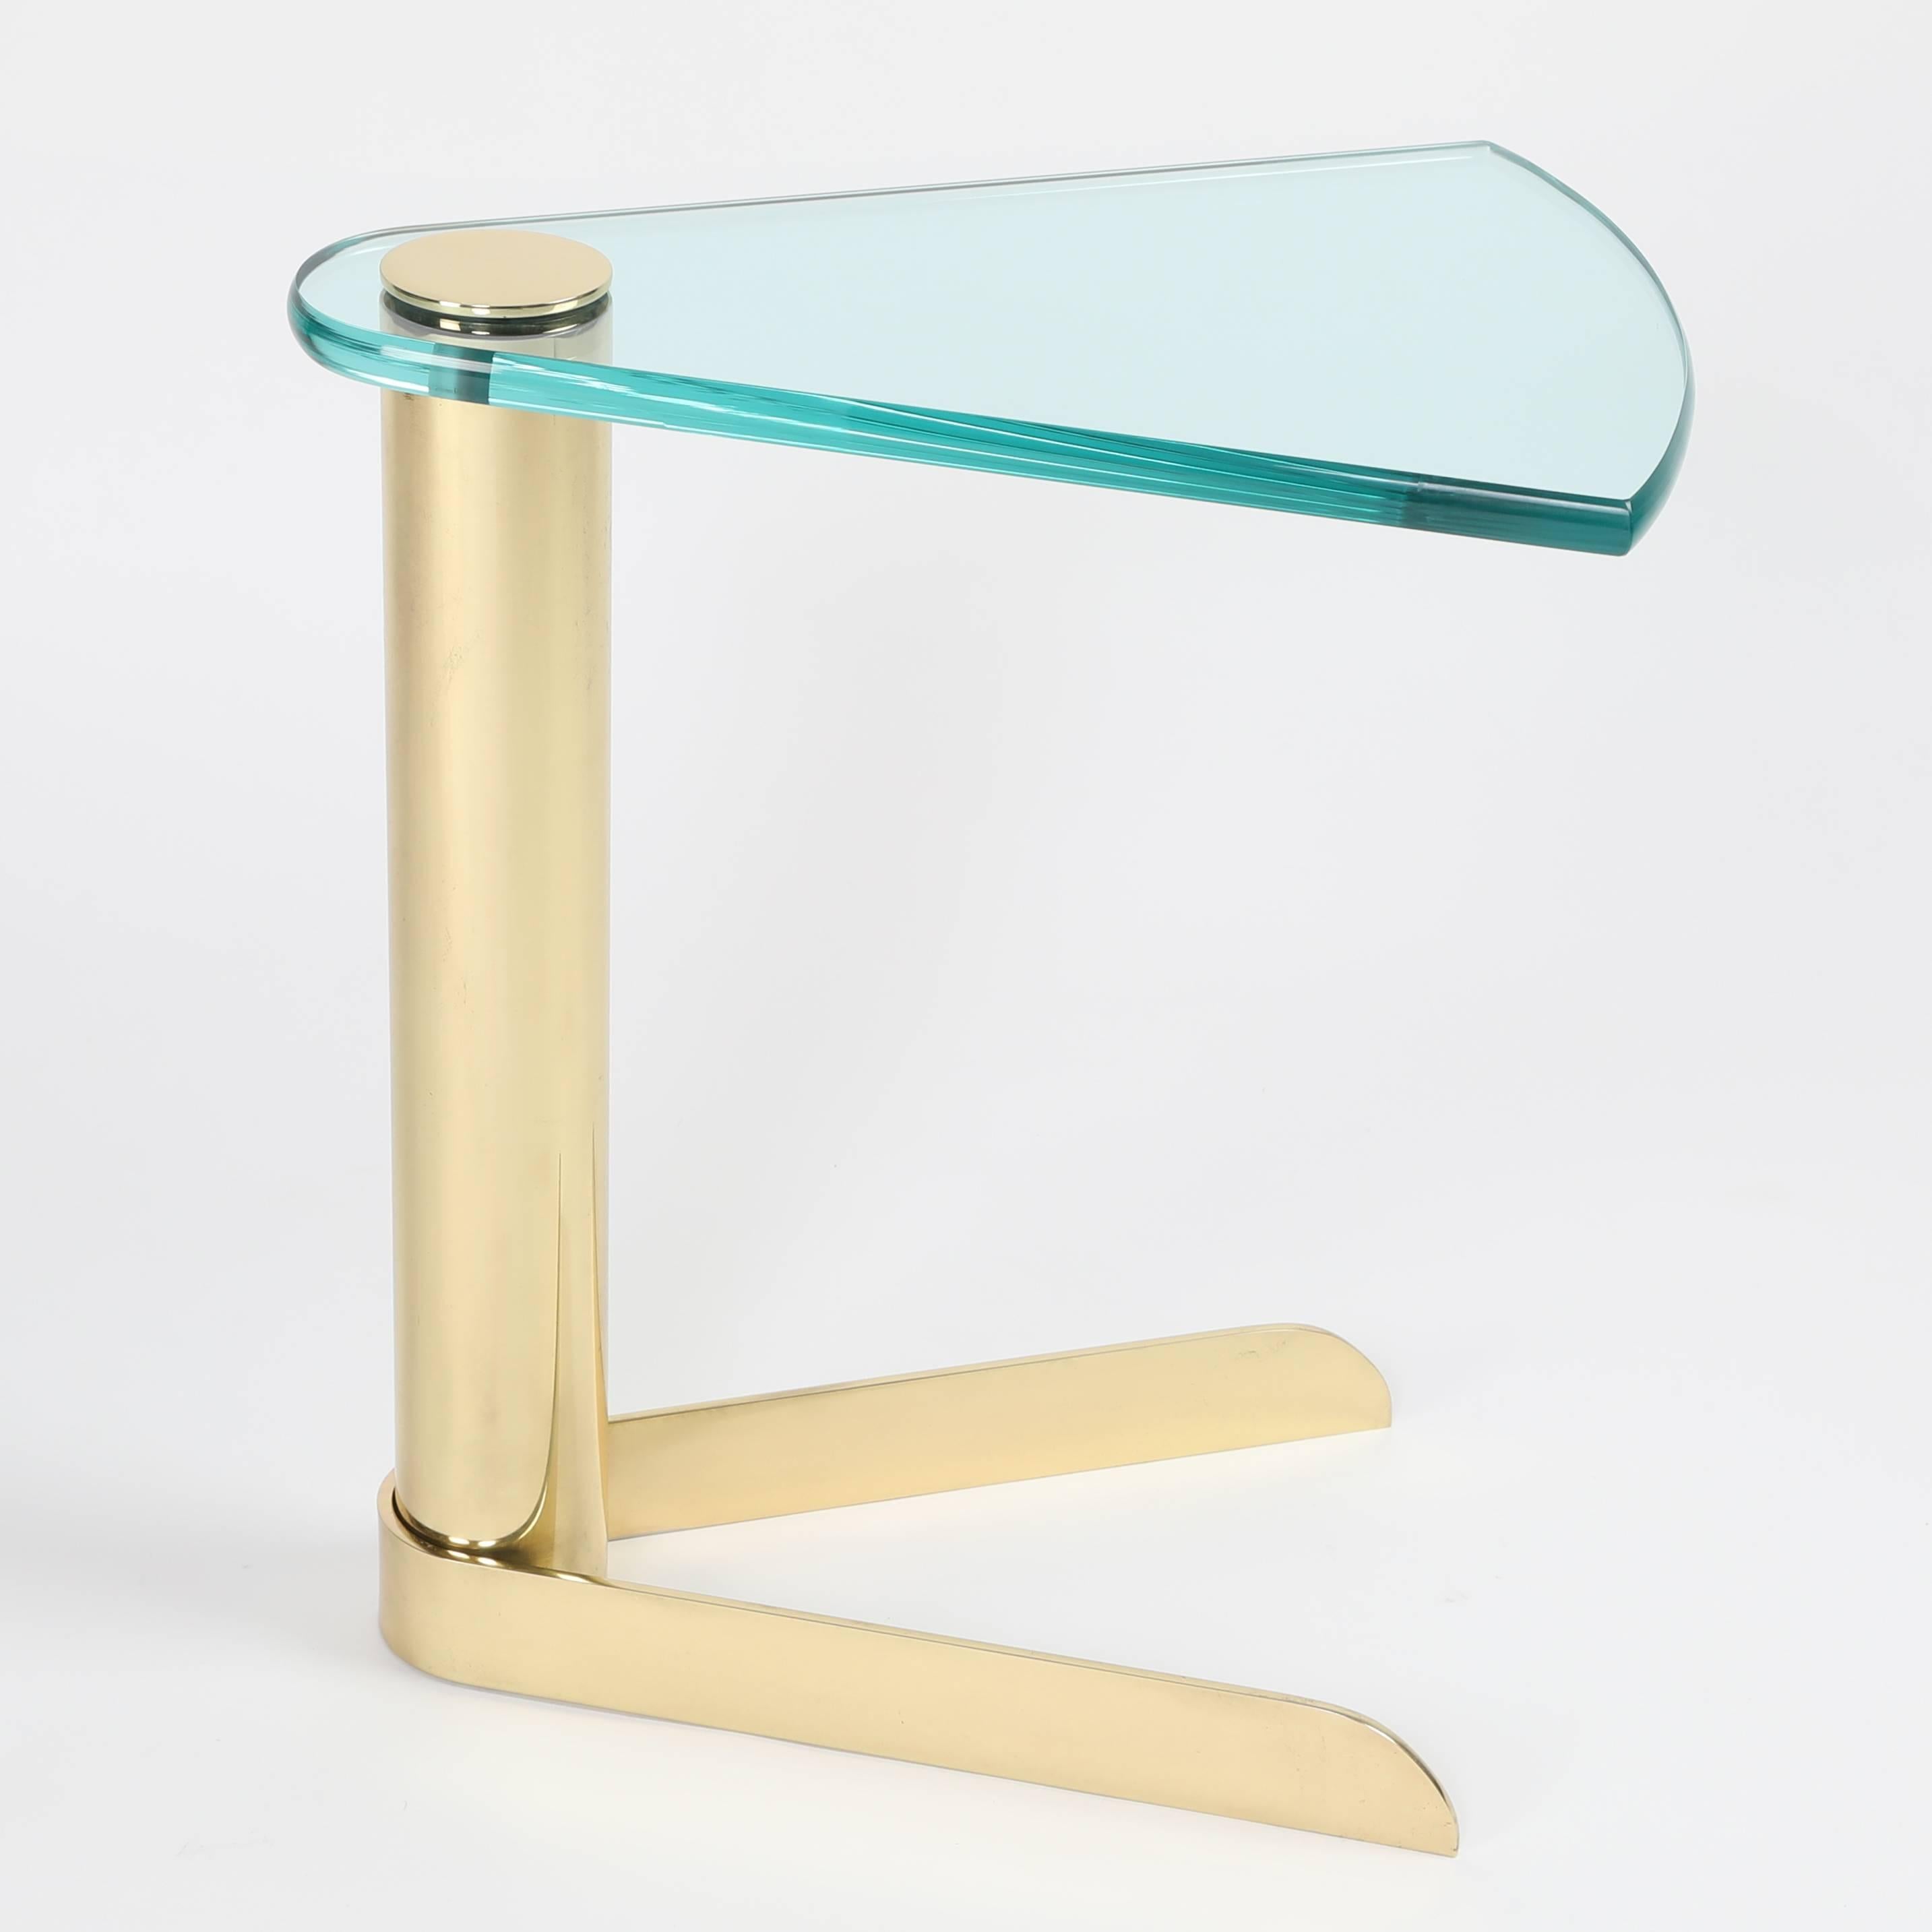 American 1970s Wedge-Shaped Occasional Table in Brass and Glass by Pace Furniture